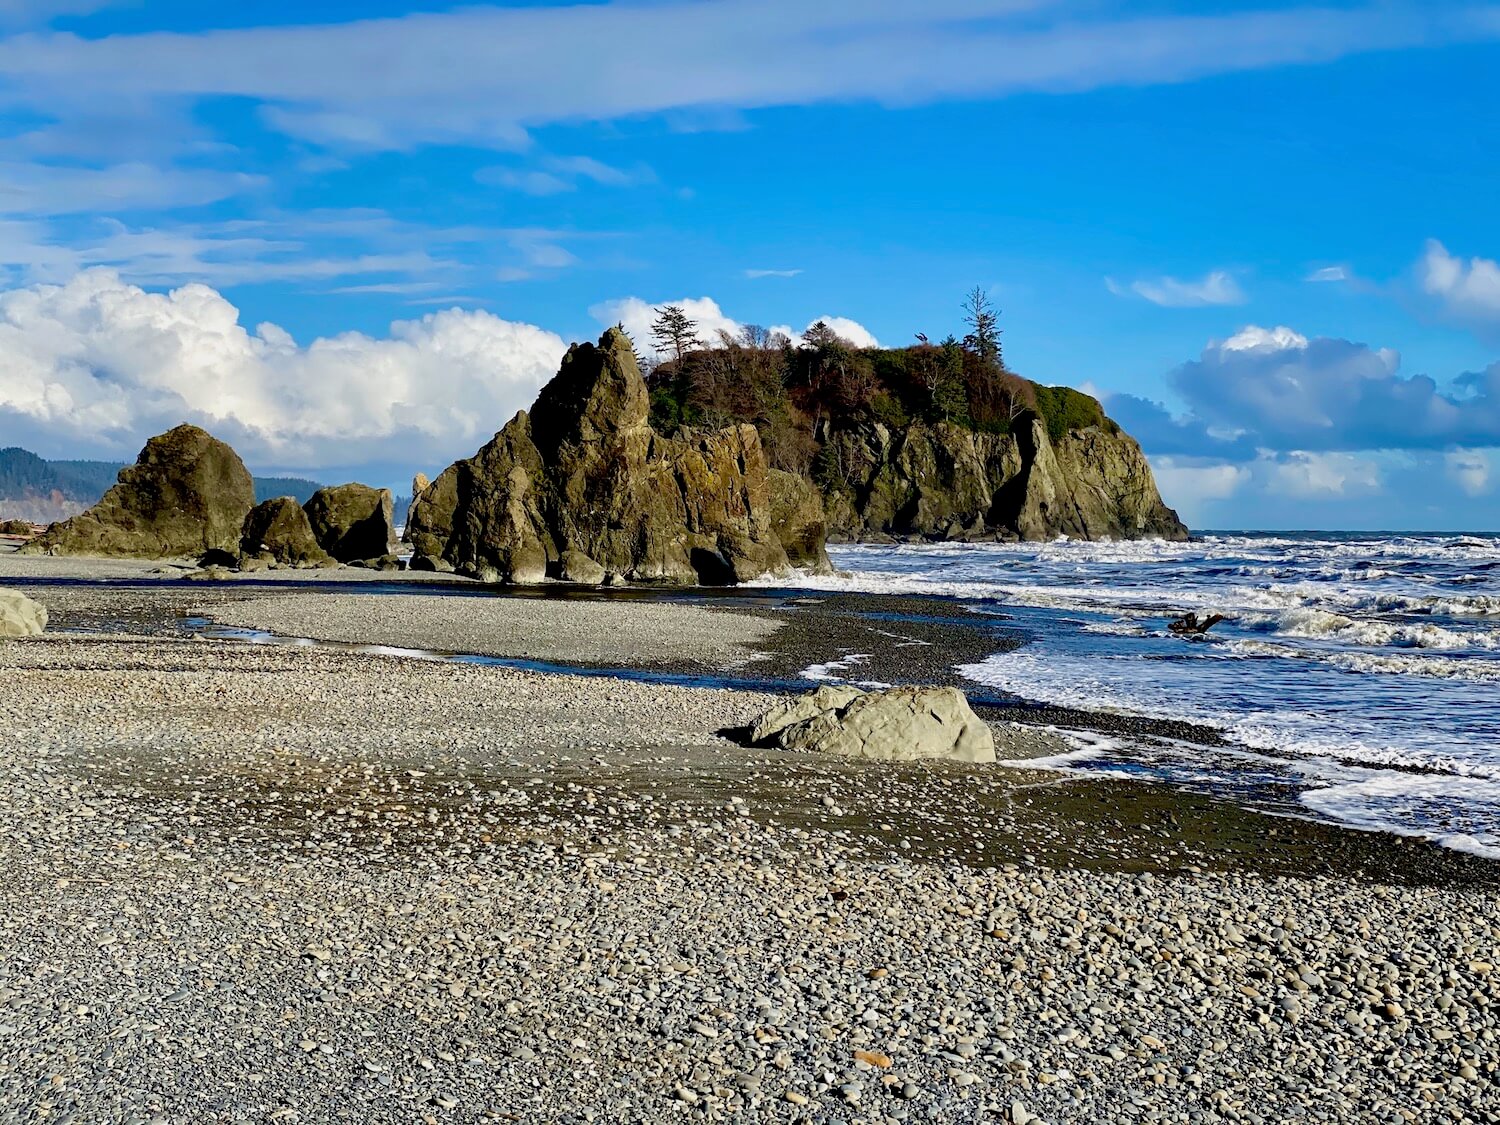 A beautiful beach scene combines bright blue skies with some puffy white clouds and rock stacks indicative of the Washington Coast. The surf is crashing waves onto the rocky beach revealed by low tide.